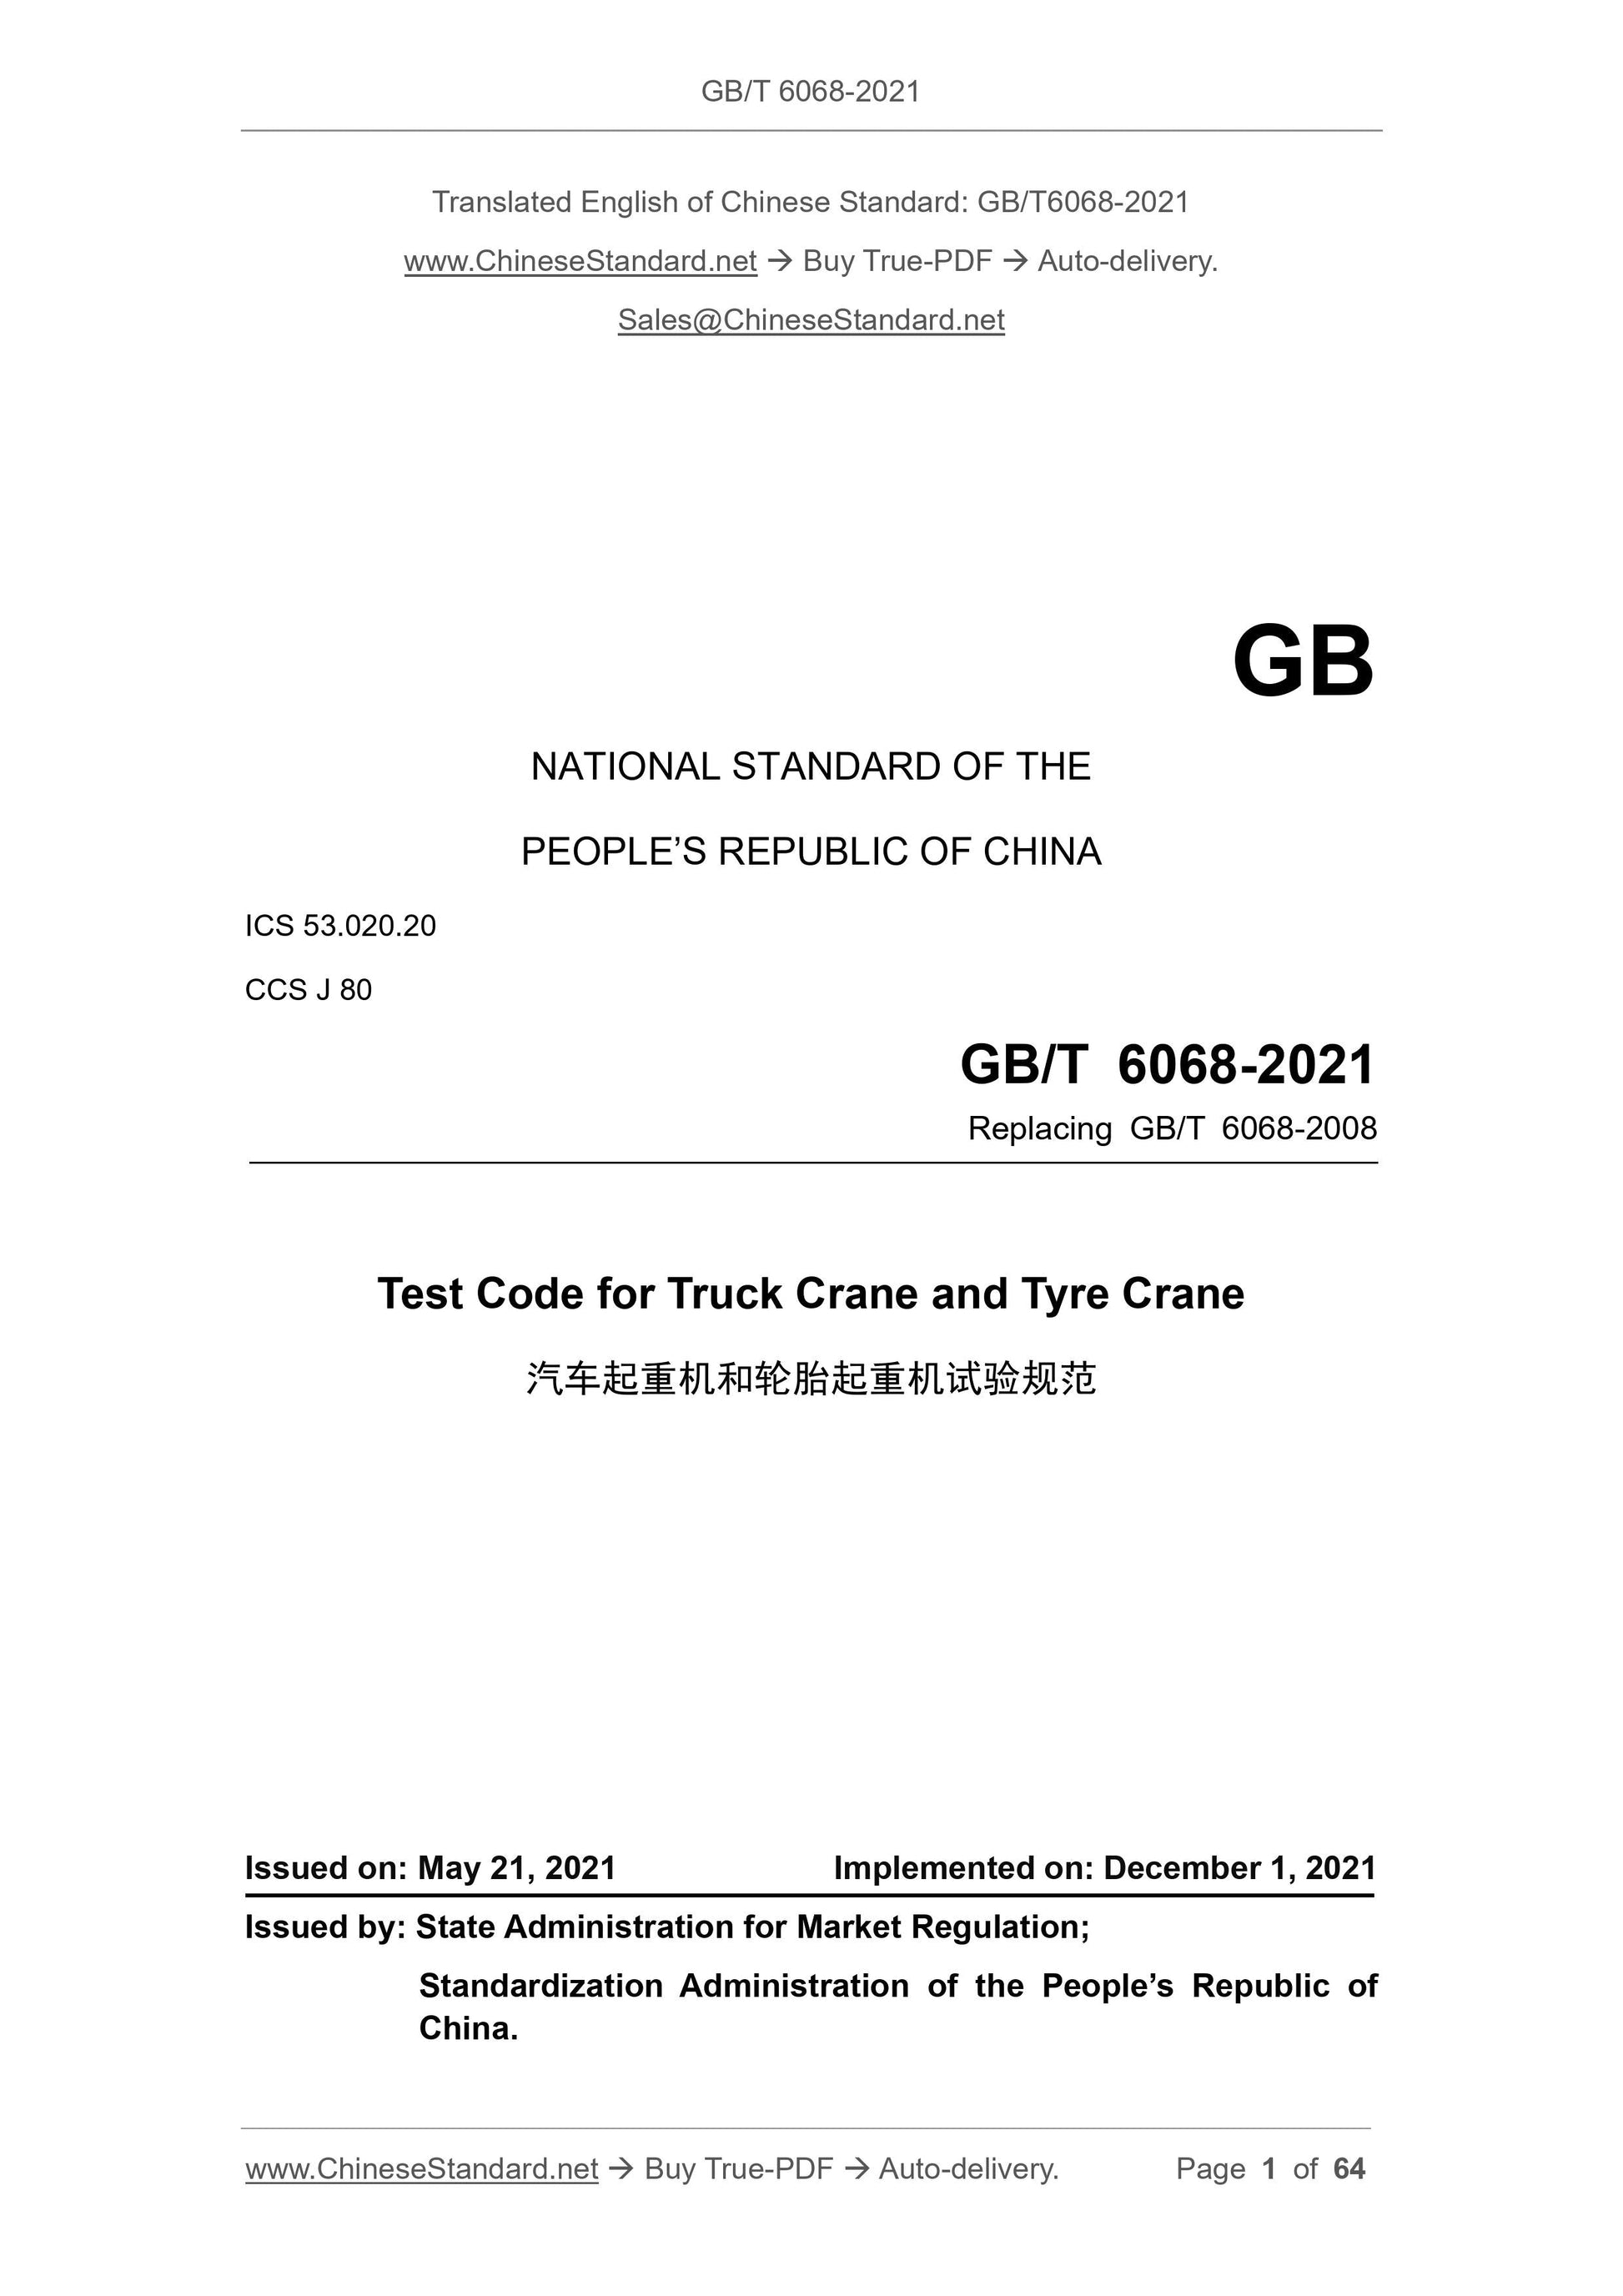 GB/T 6068-2021 Page 1